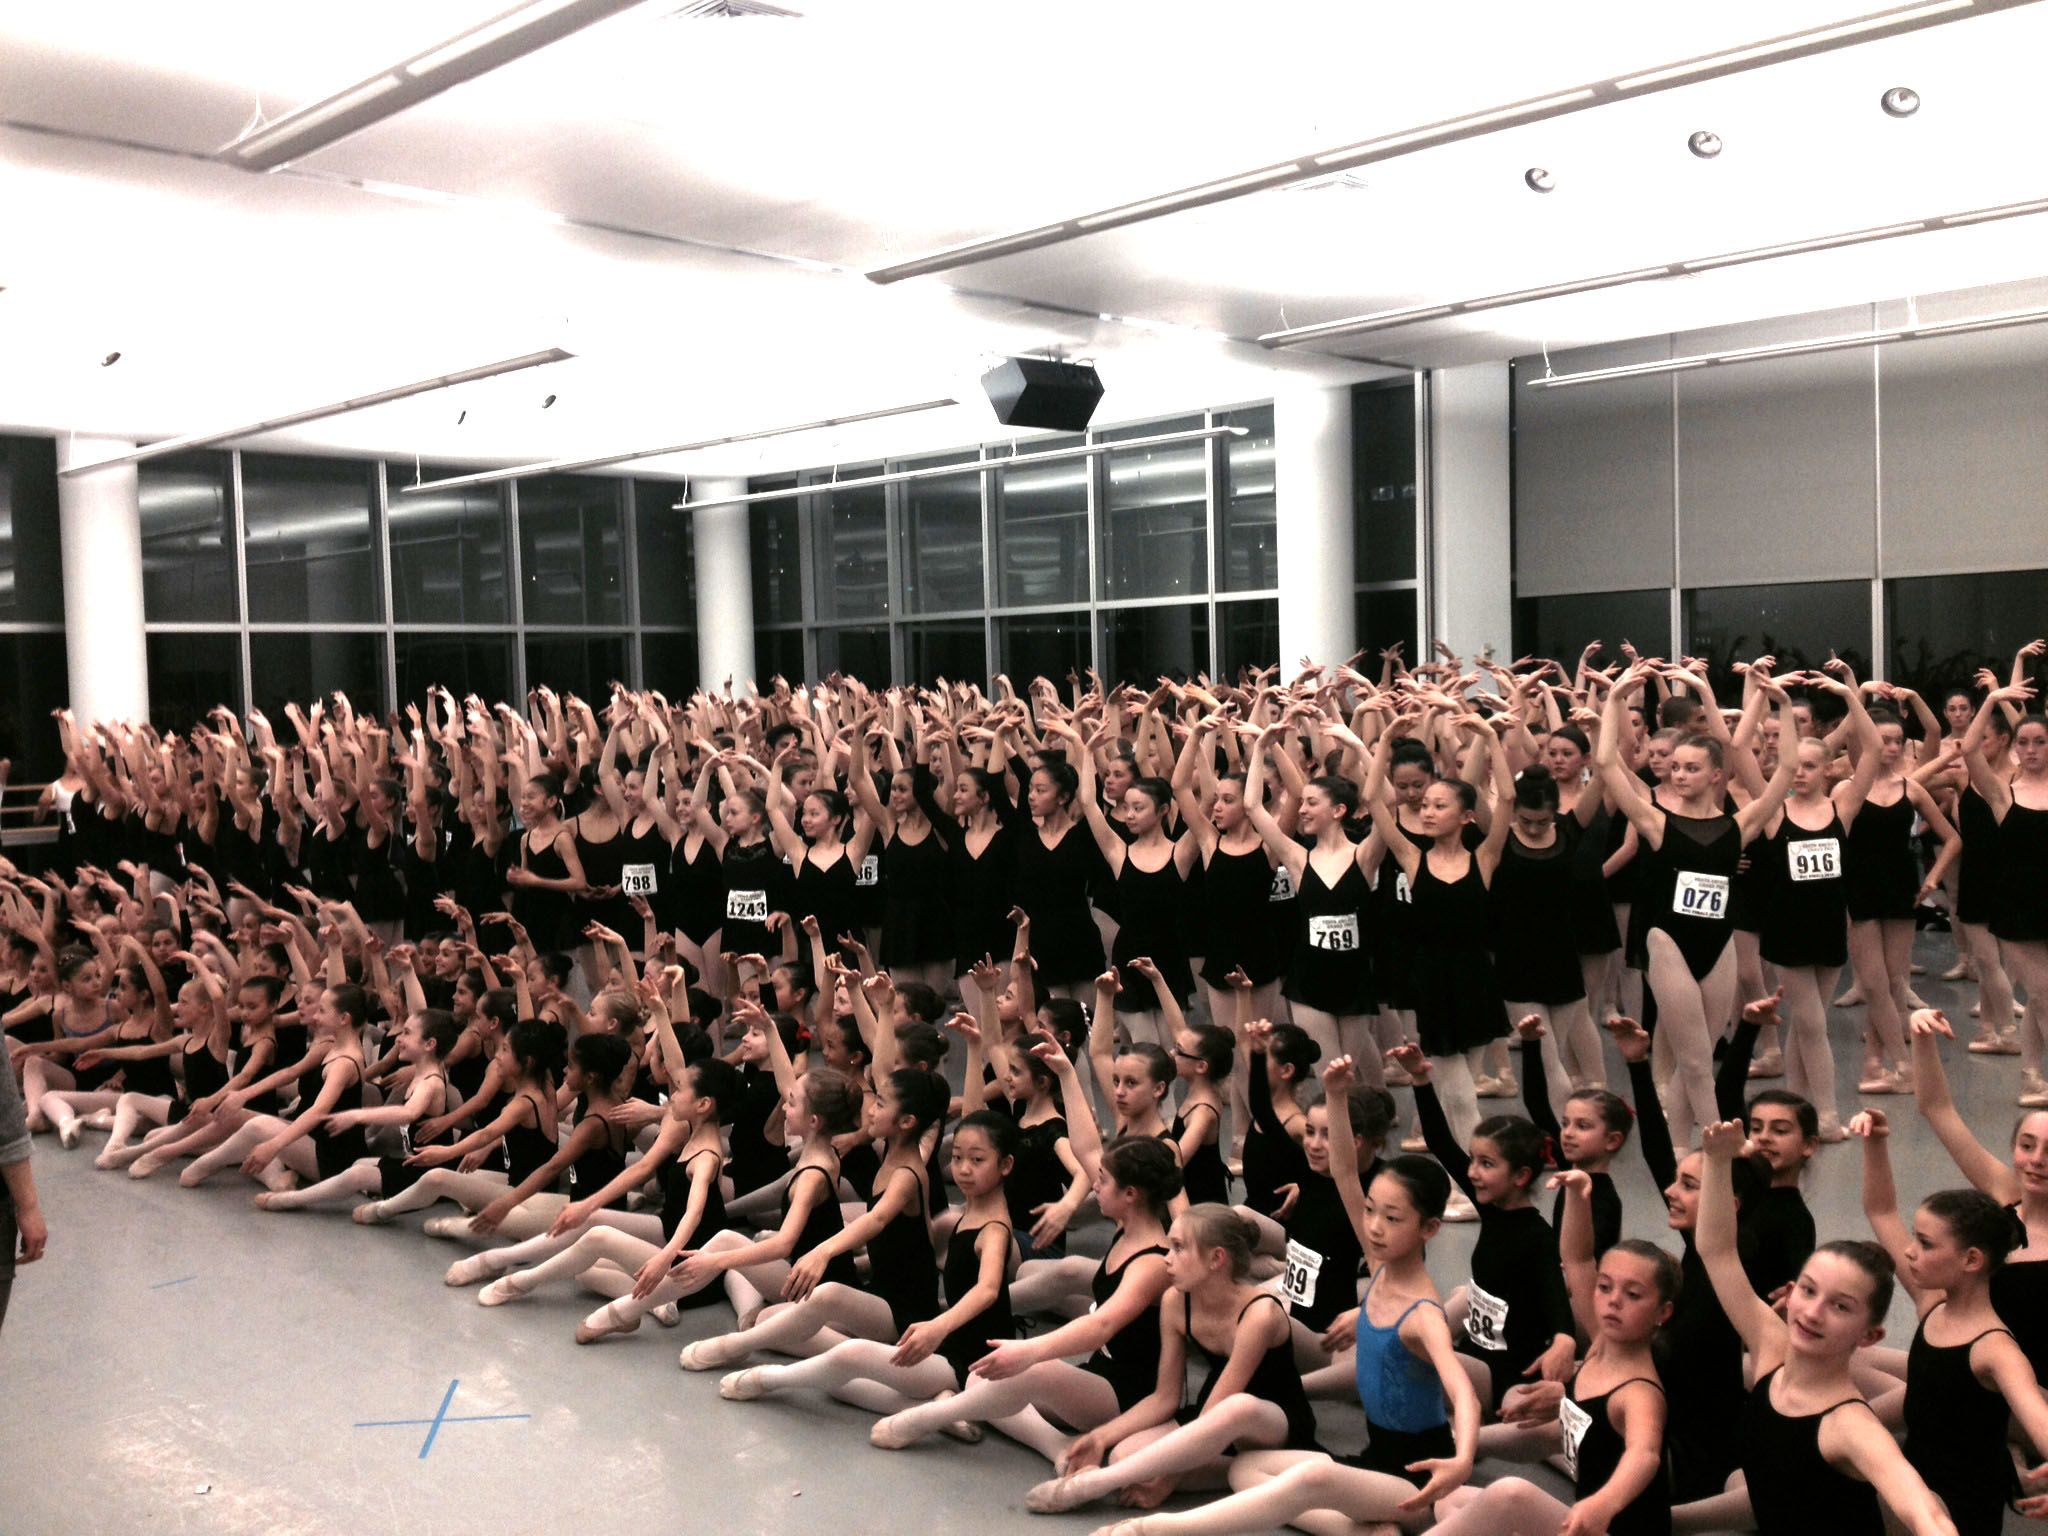 Rehearsal in Alvin Ailey studios in New York City. (Submitted photo)